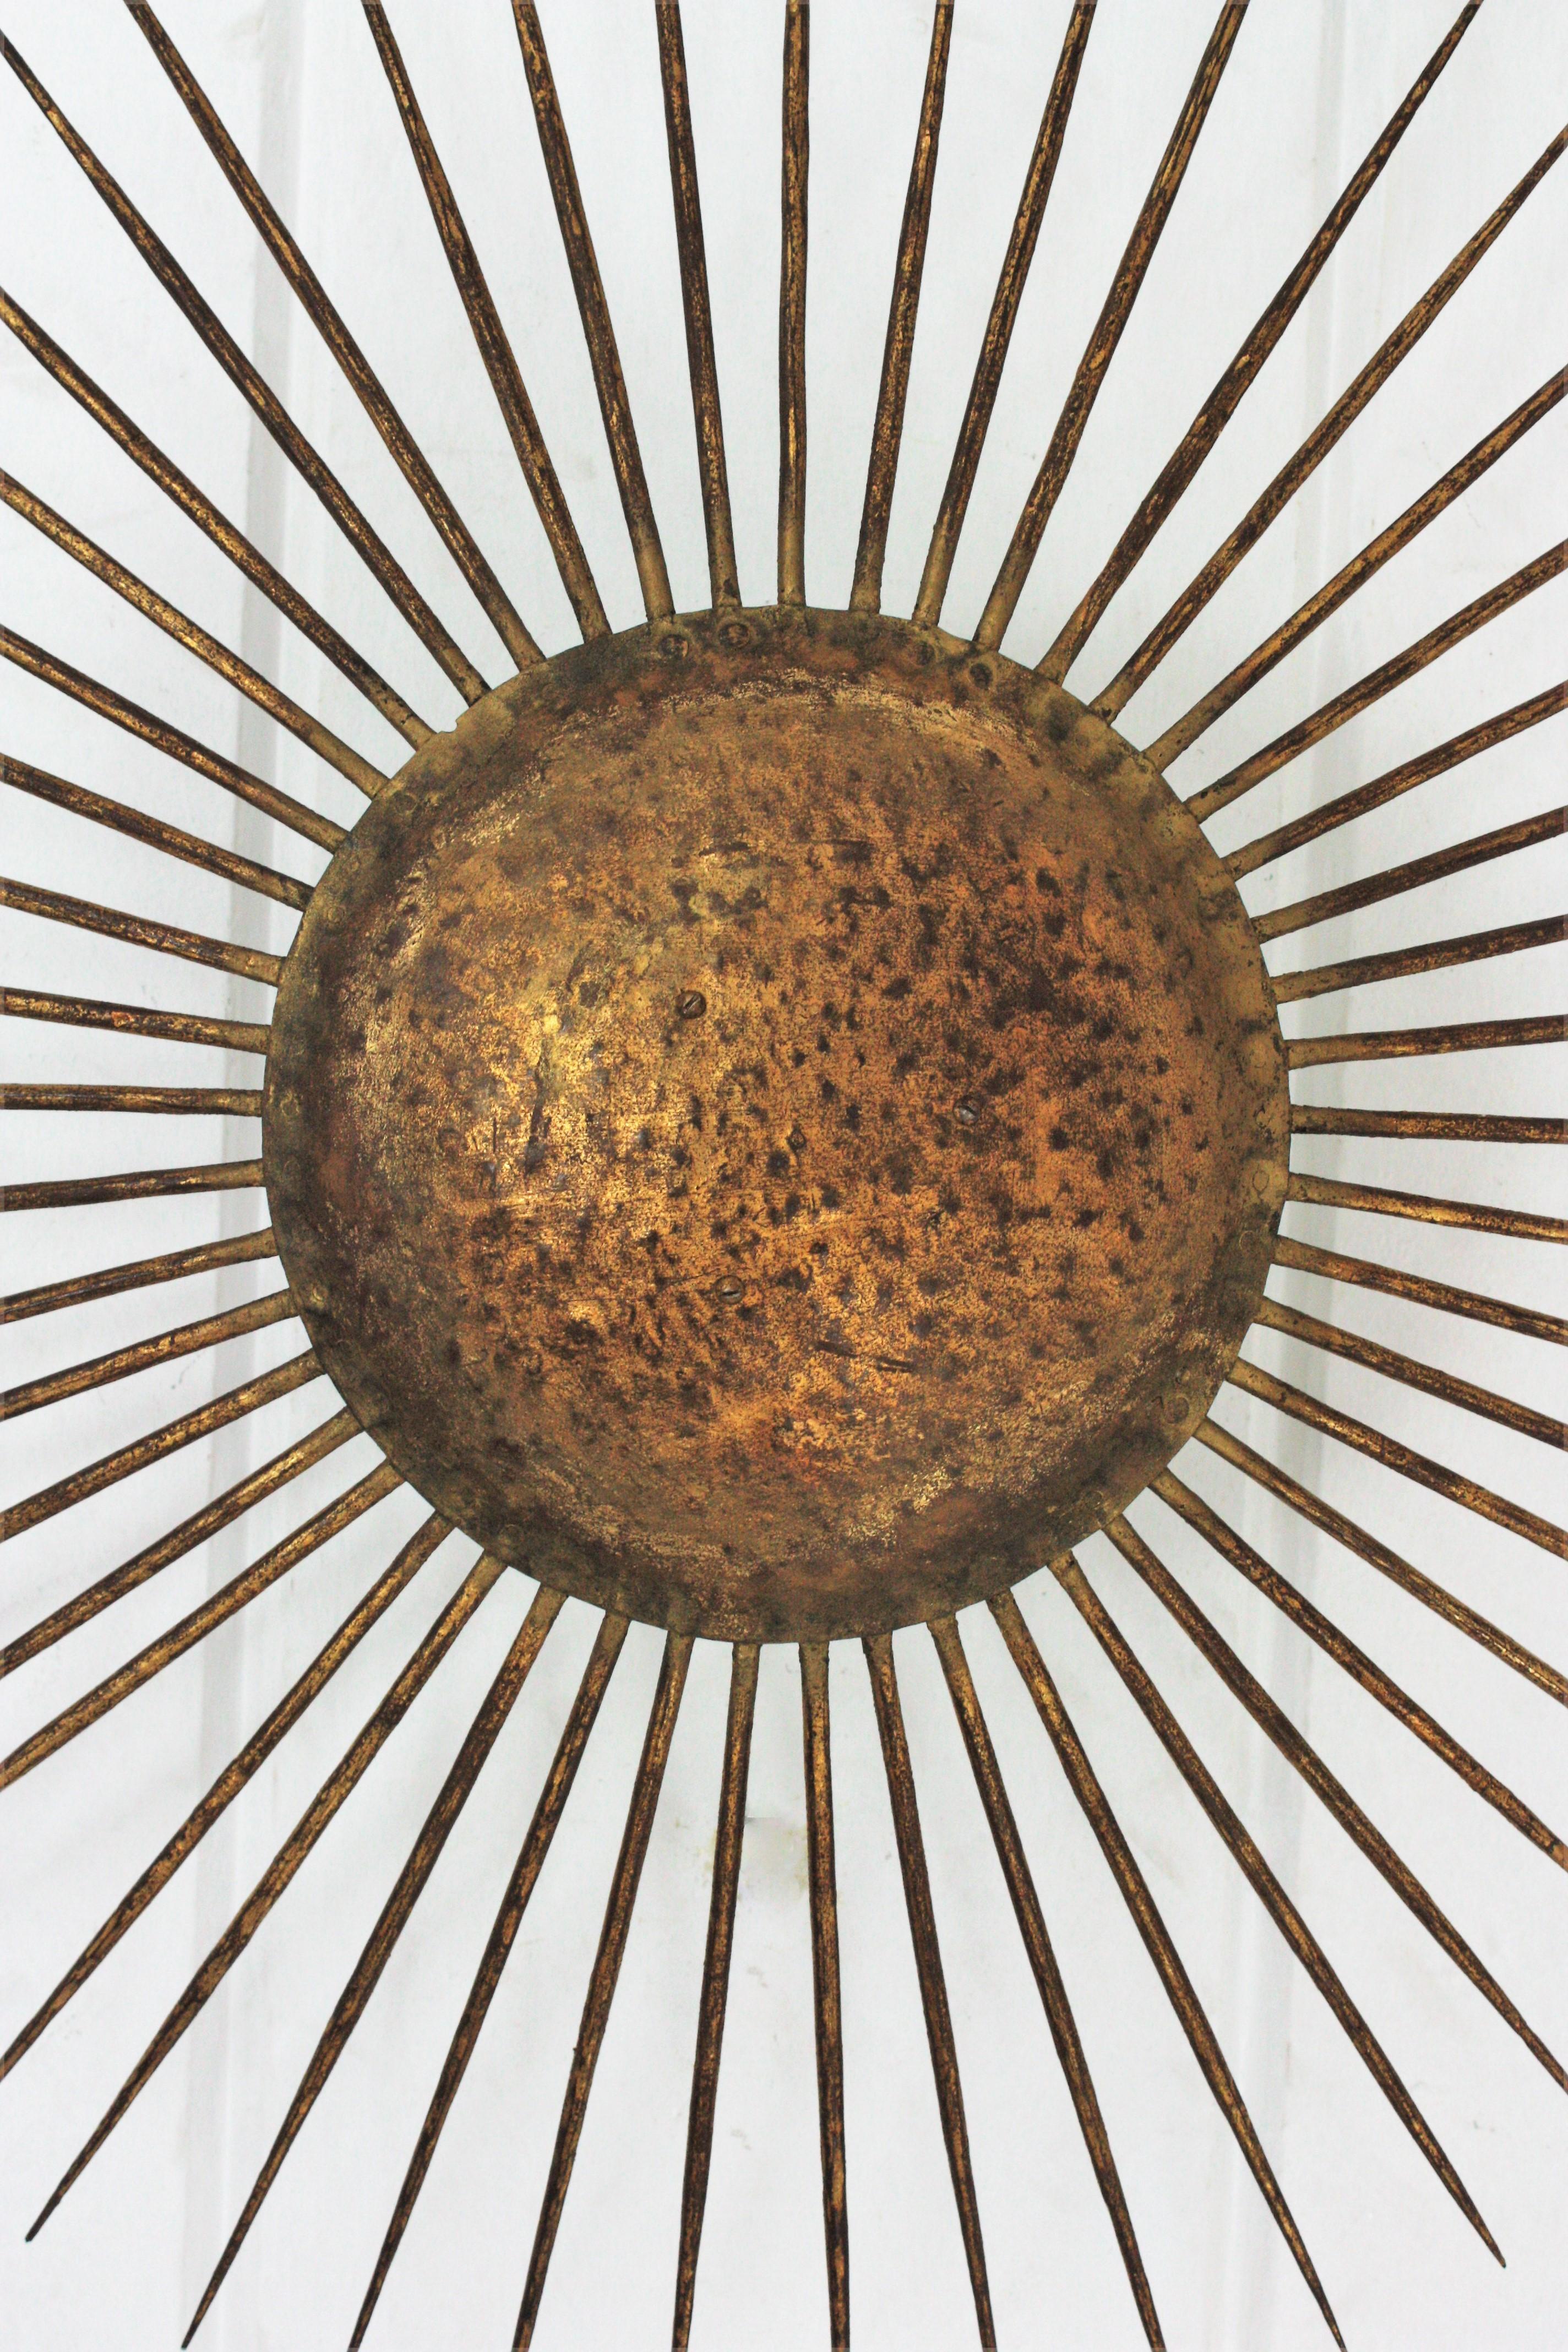 20th Century French Sunburst Ceiling Light Fixture in Gilt Wrought Iron, 1940s For Sale